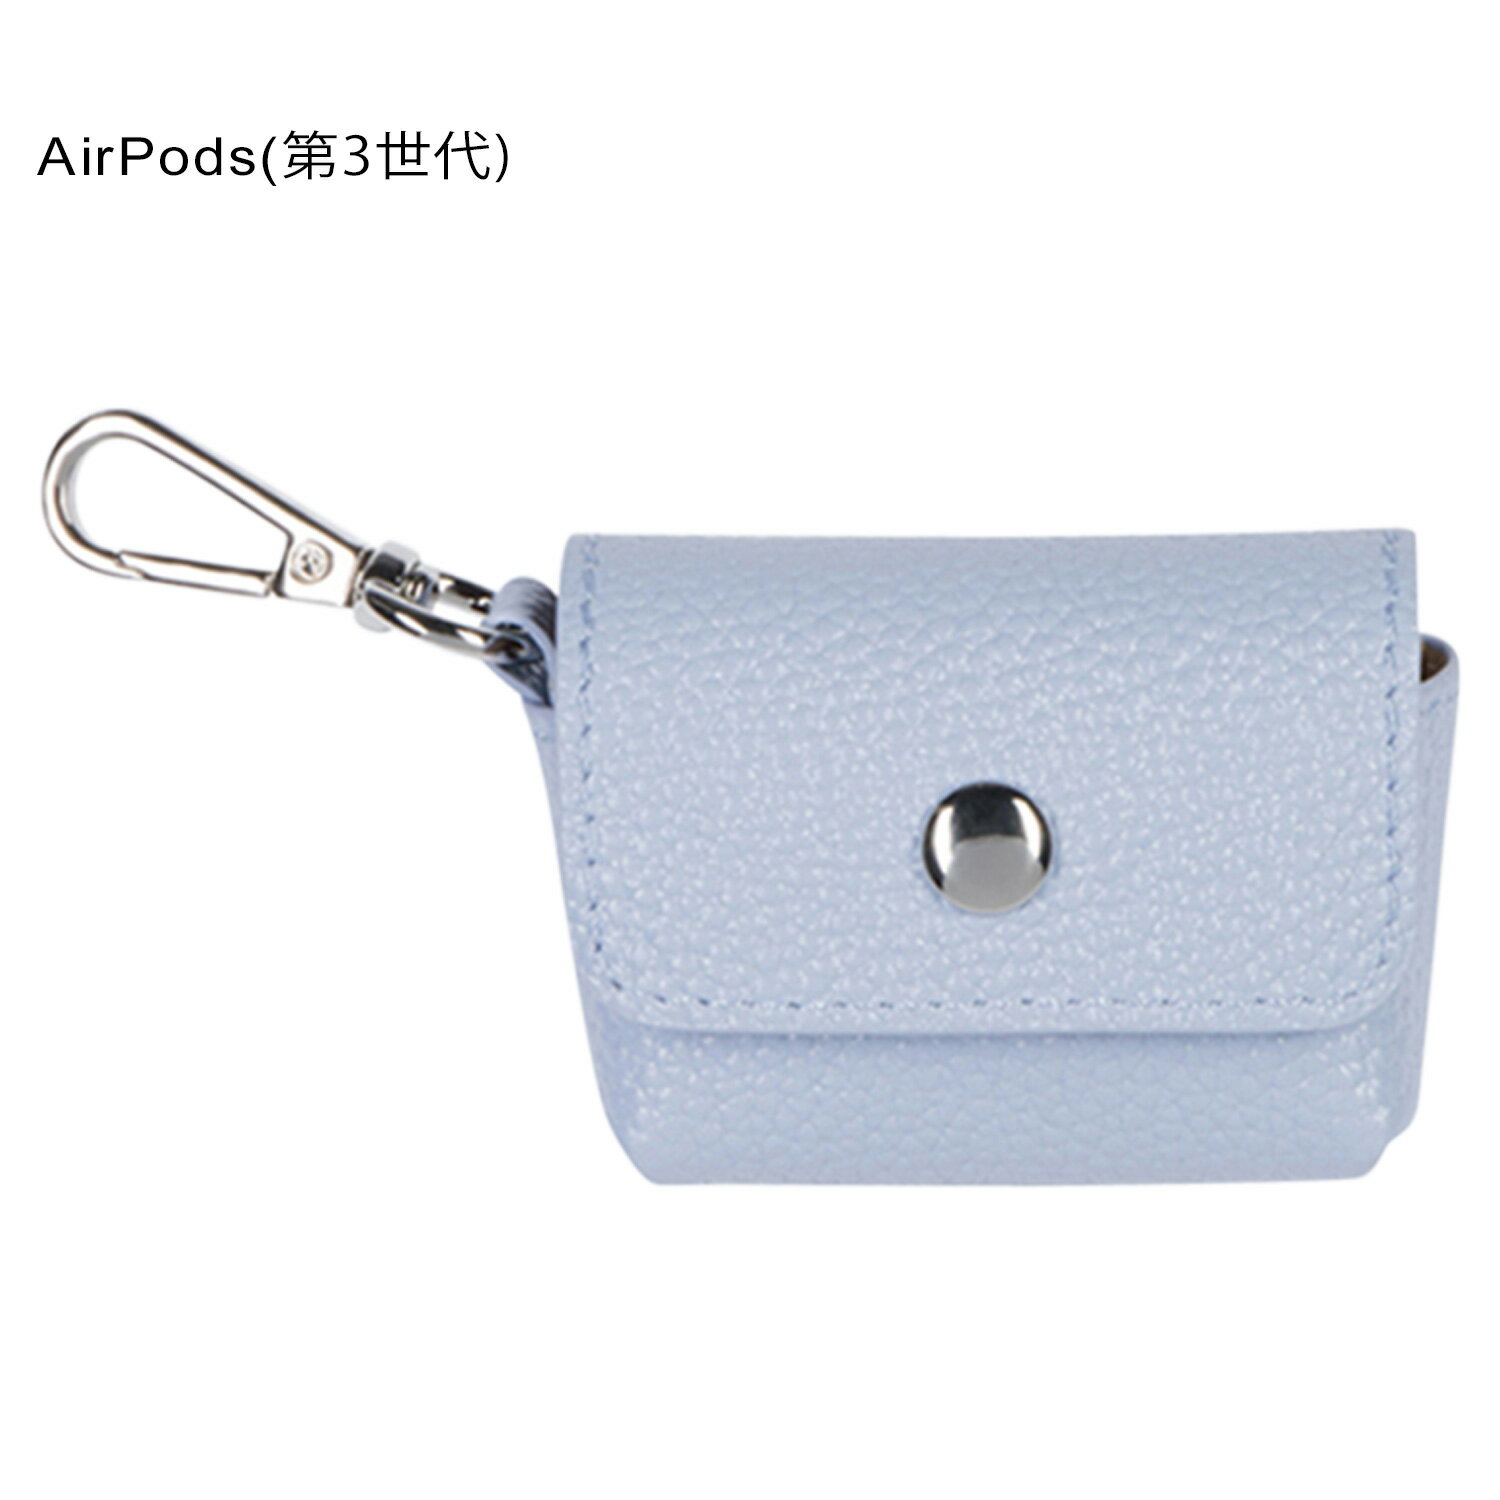 BANDOLIER バンドリヤー ケース カバー エアーポッズ 第3世代 ポーチ メンズ レディース AirPods3 POUCH PERIWINKLE ブルー 49AVE